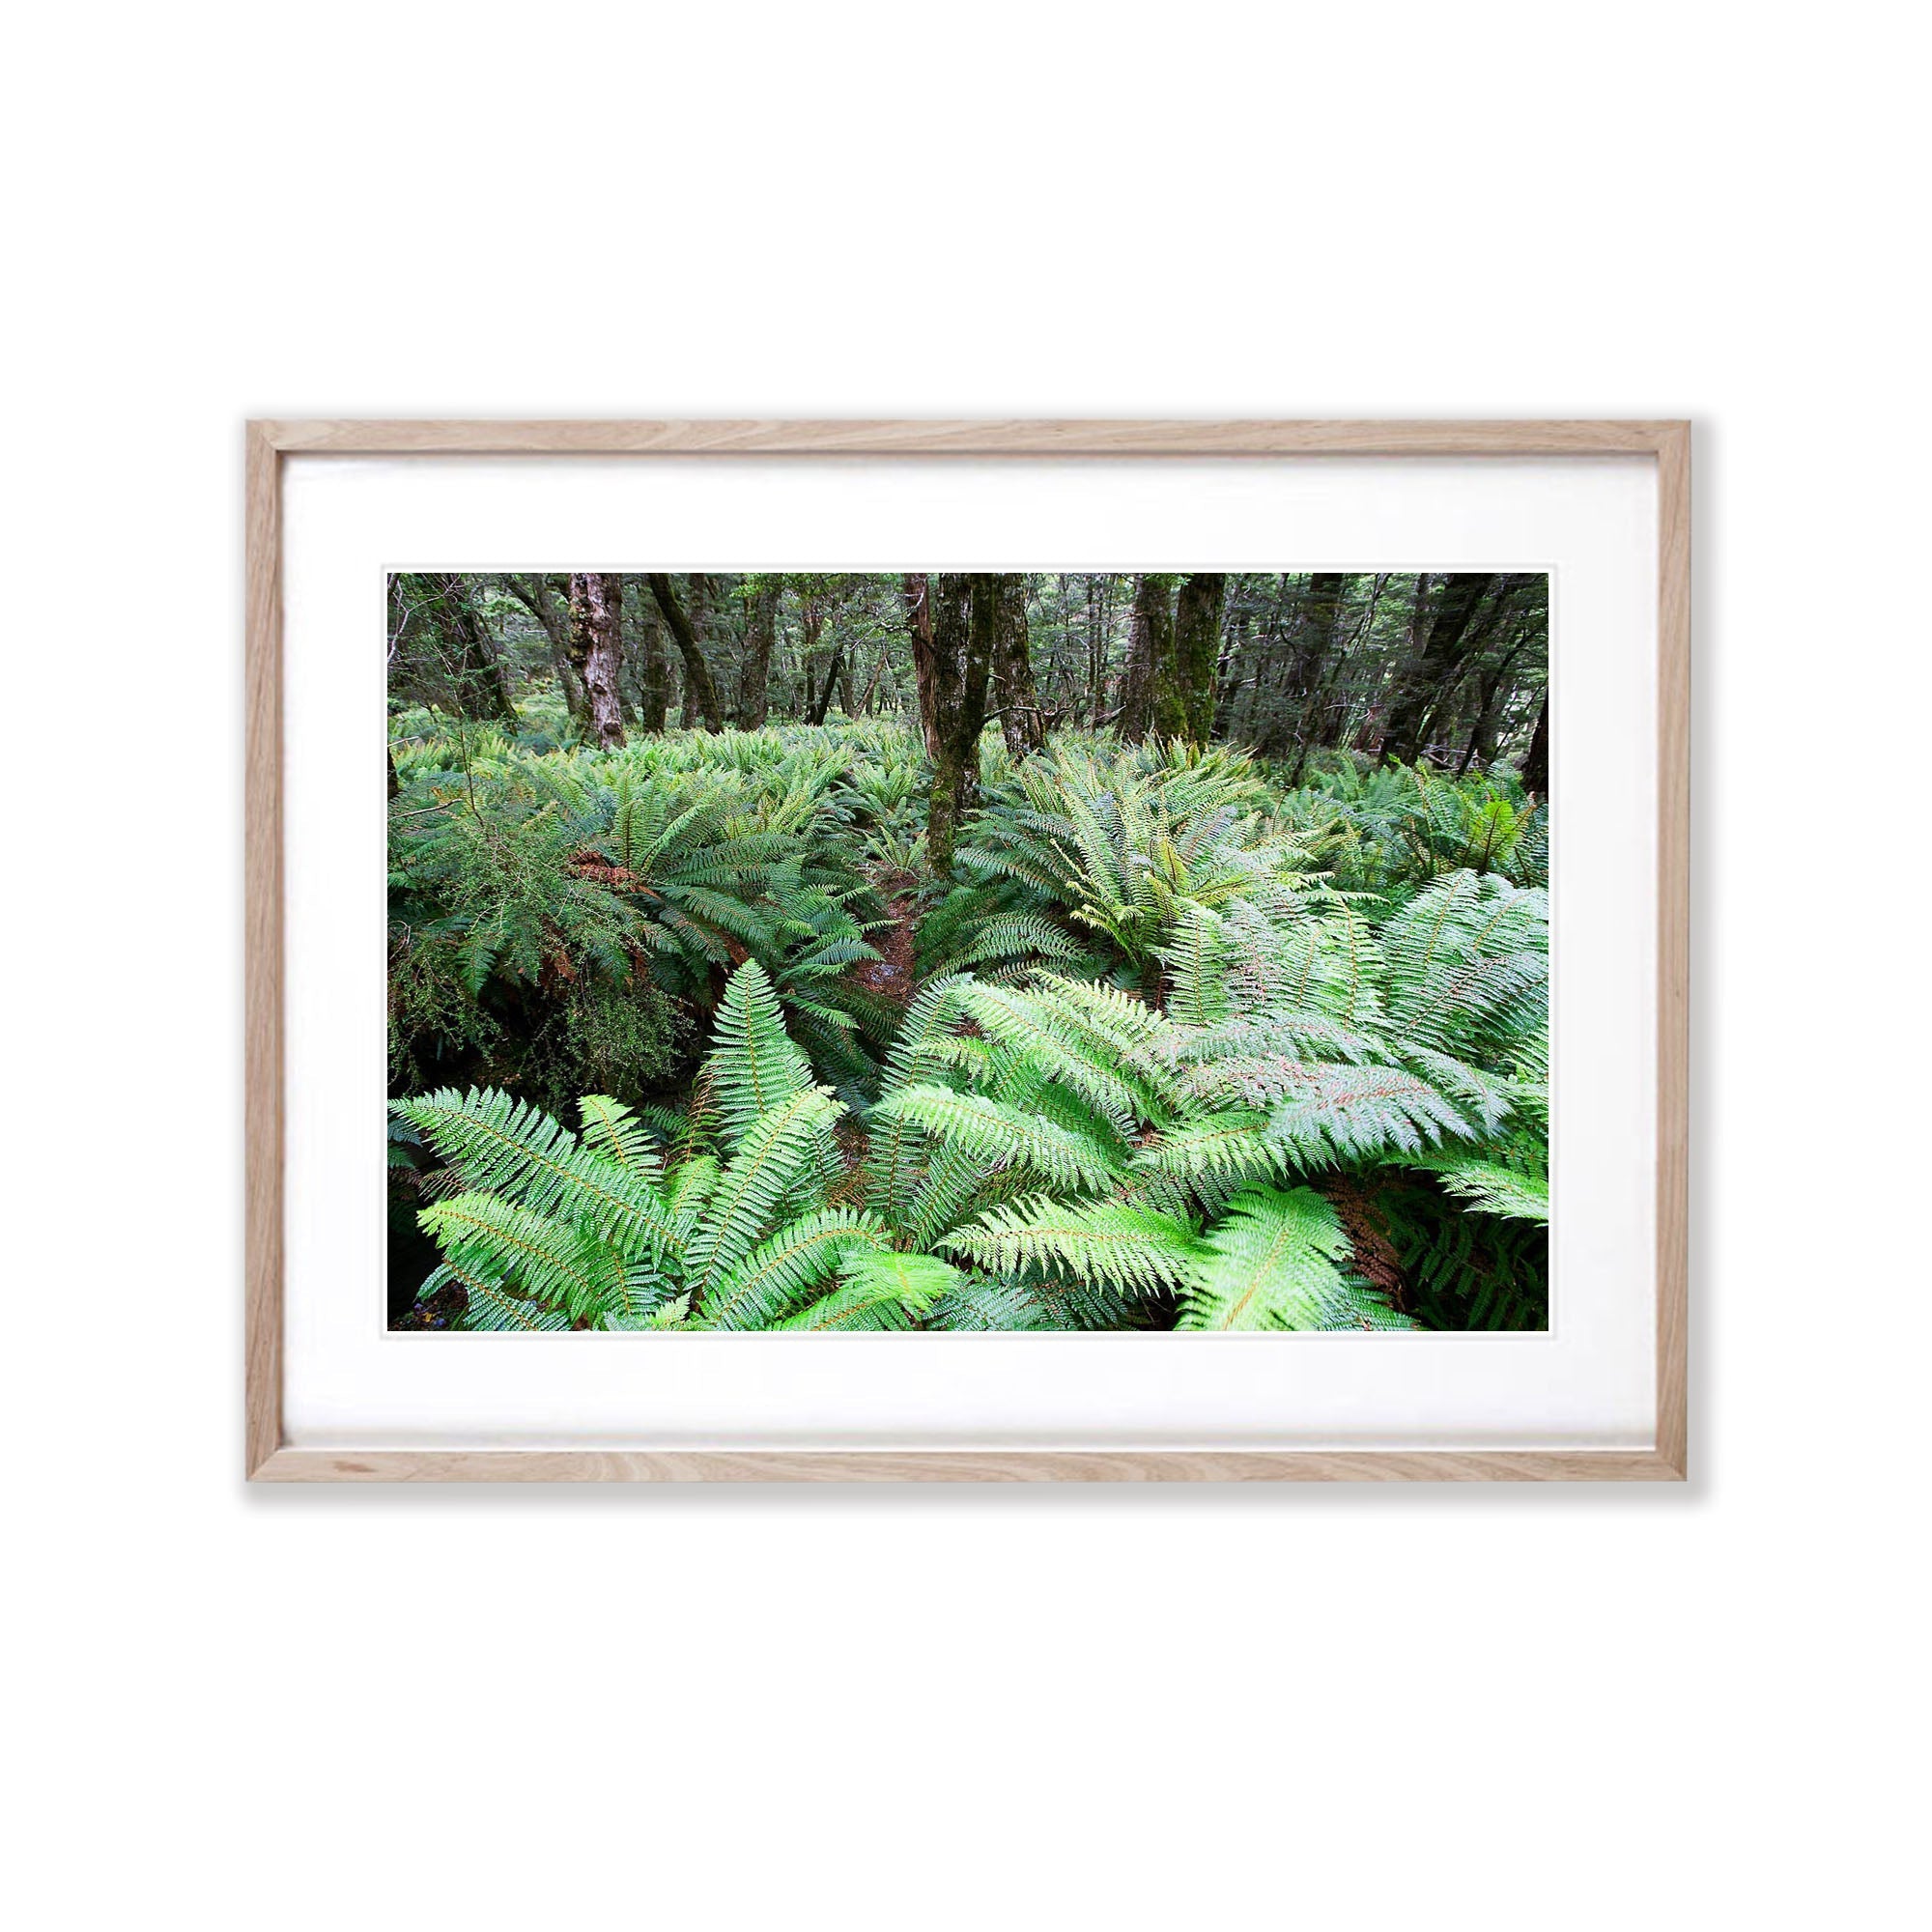 The Routeburn Fern Forests, Routeburn Track - New Zealand